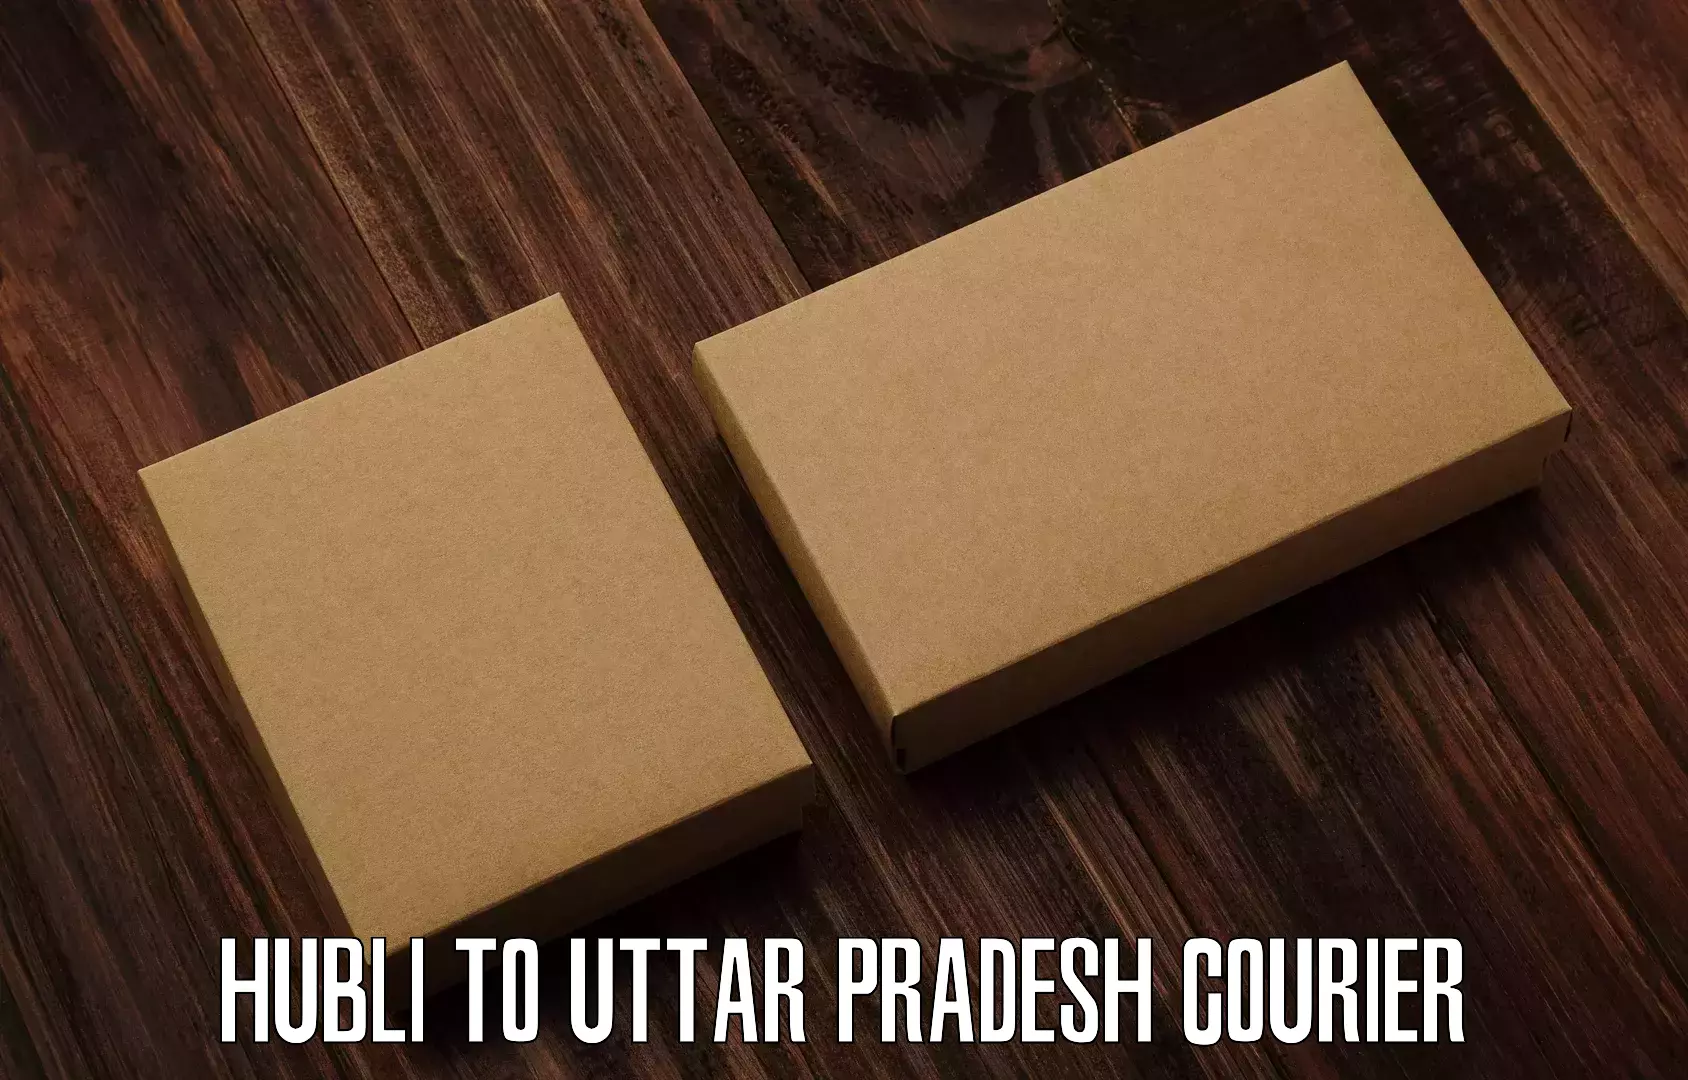 State-of-the-art courier technology Hubli to Behat